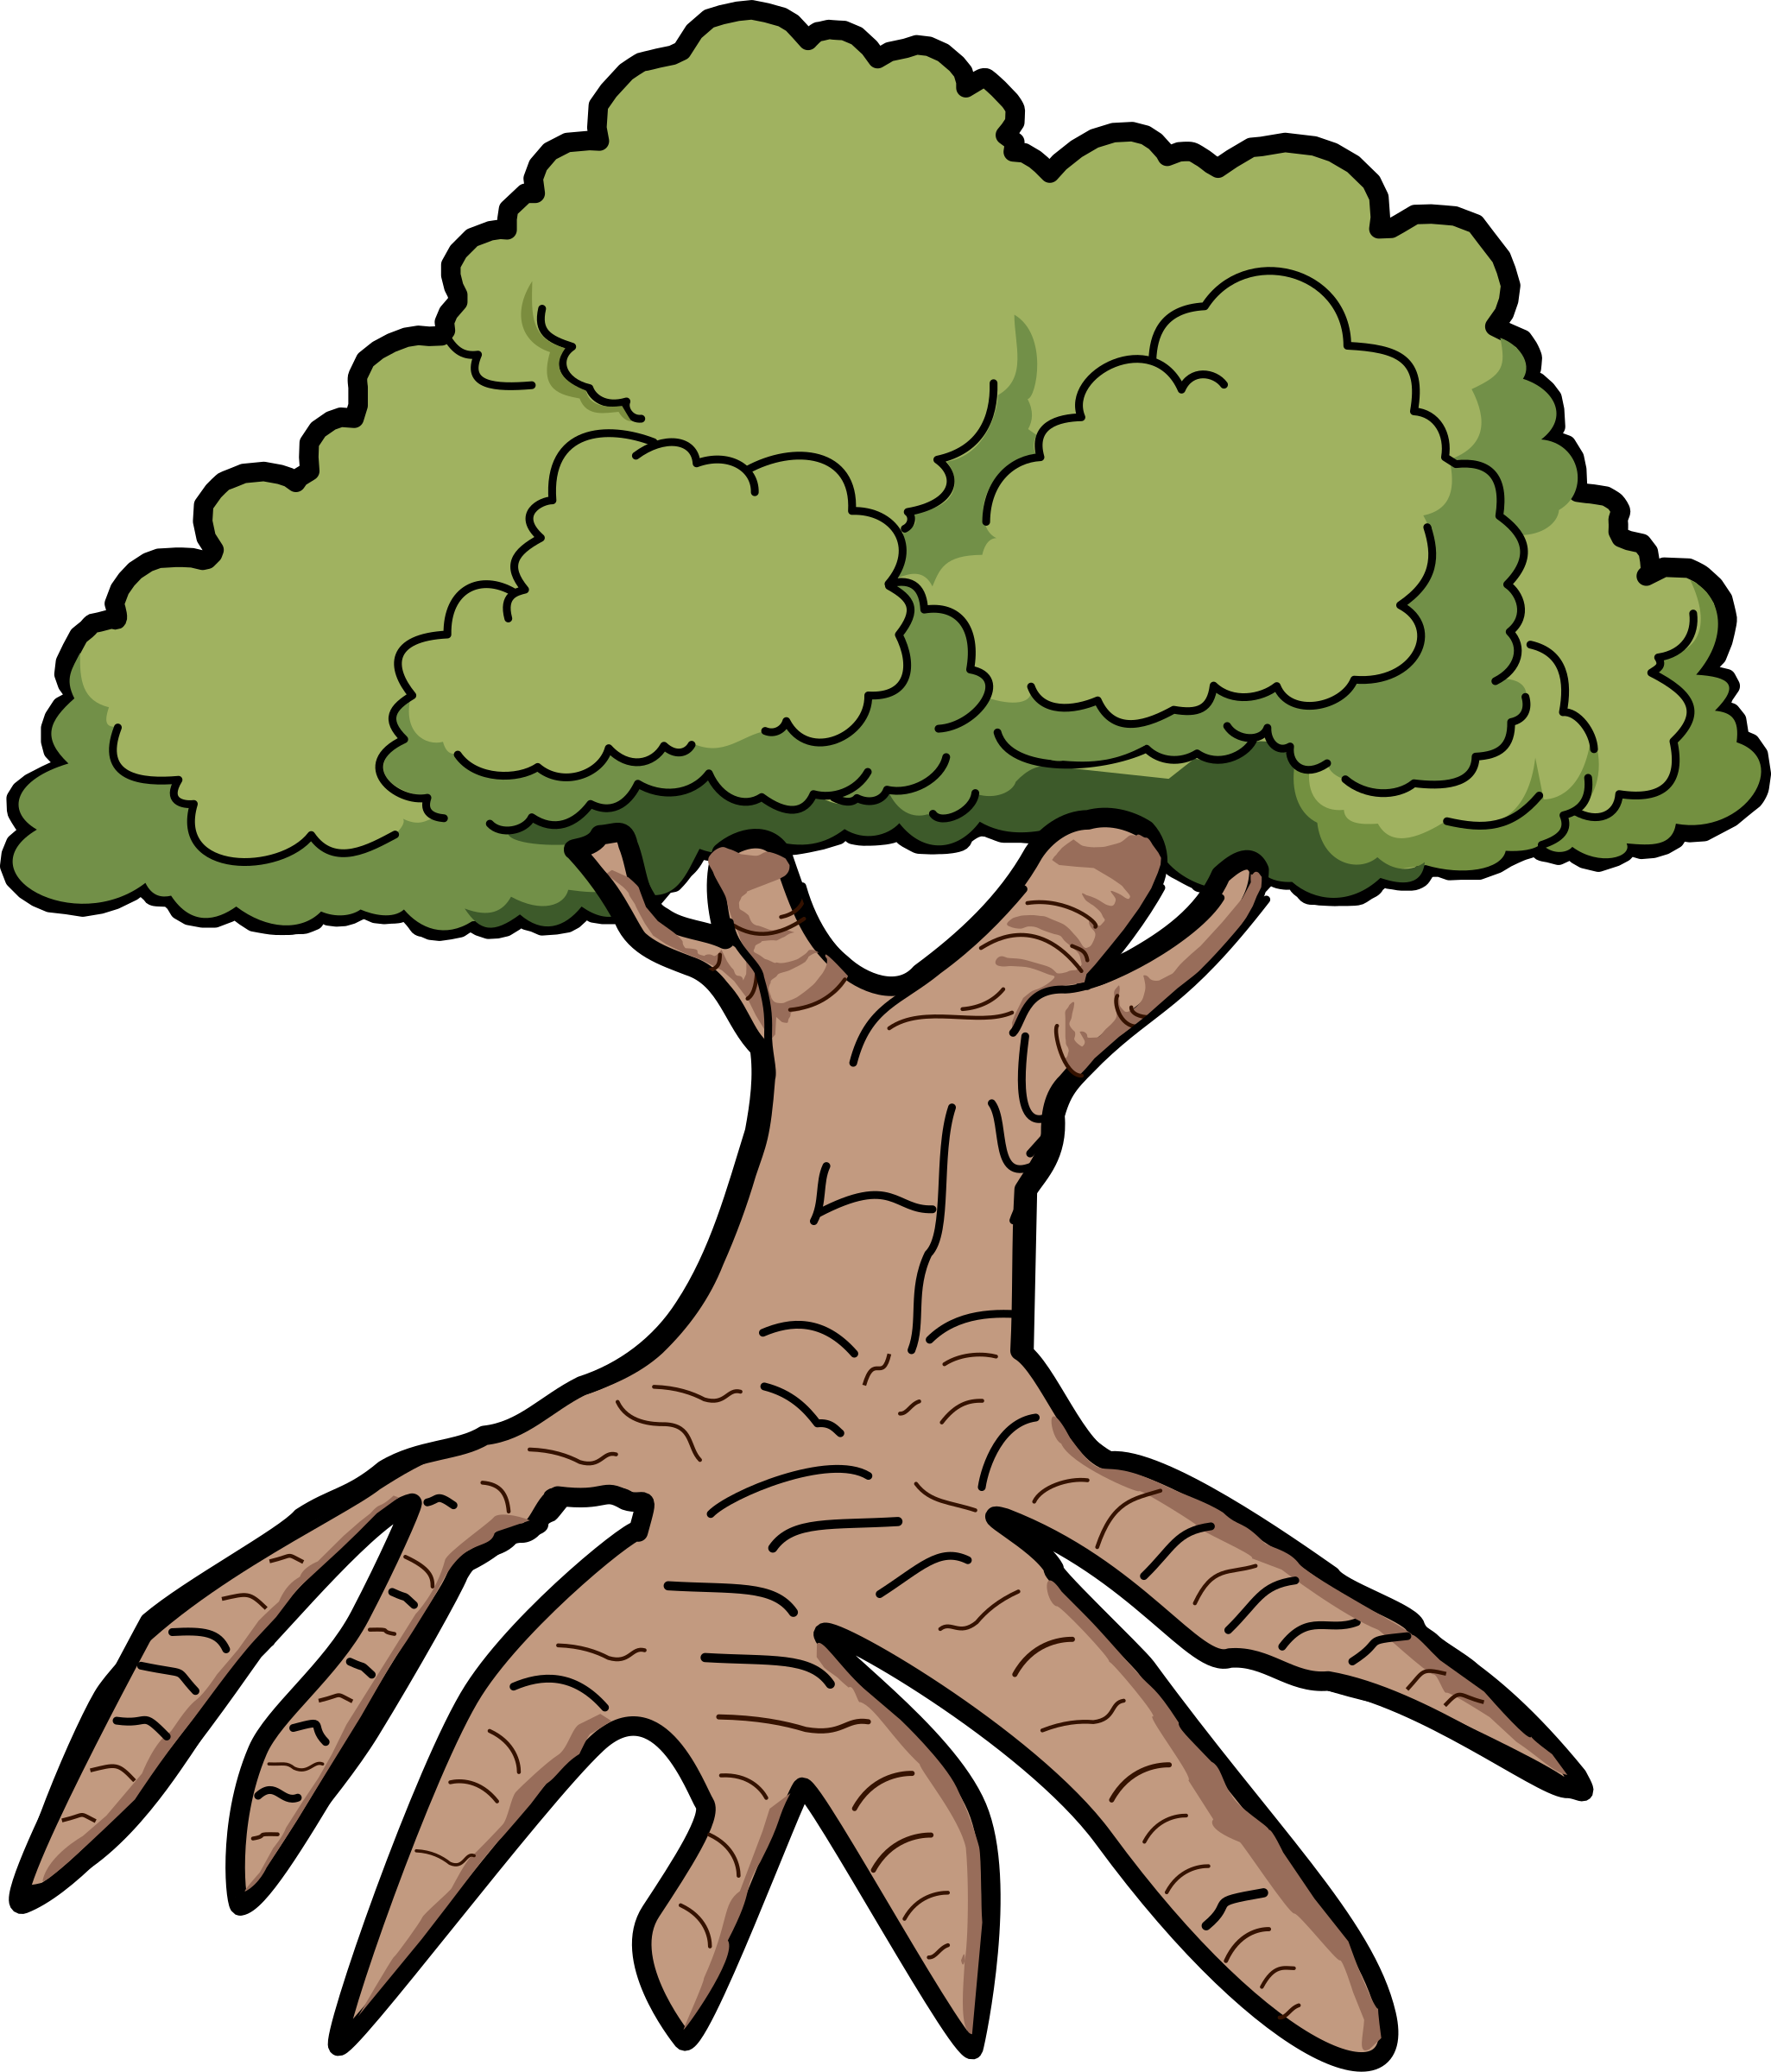 Picture Of A Tree With Roots - ClipArt Best